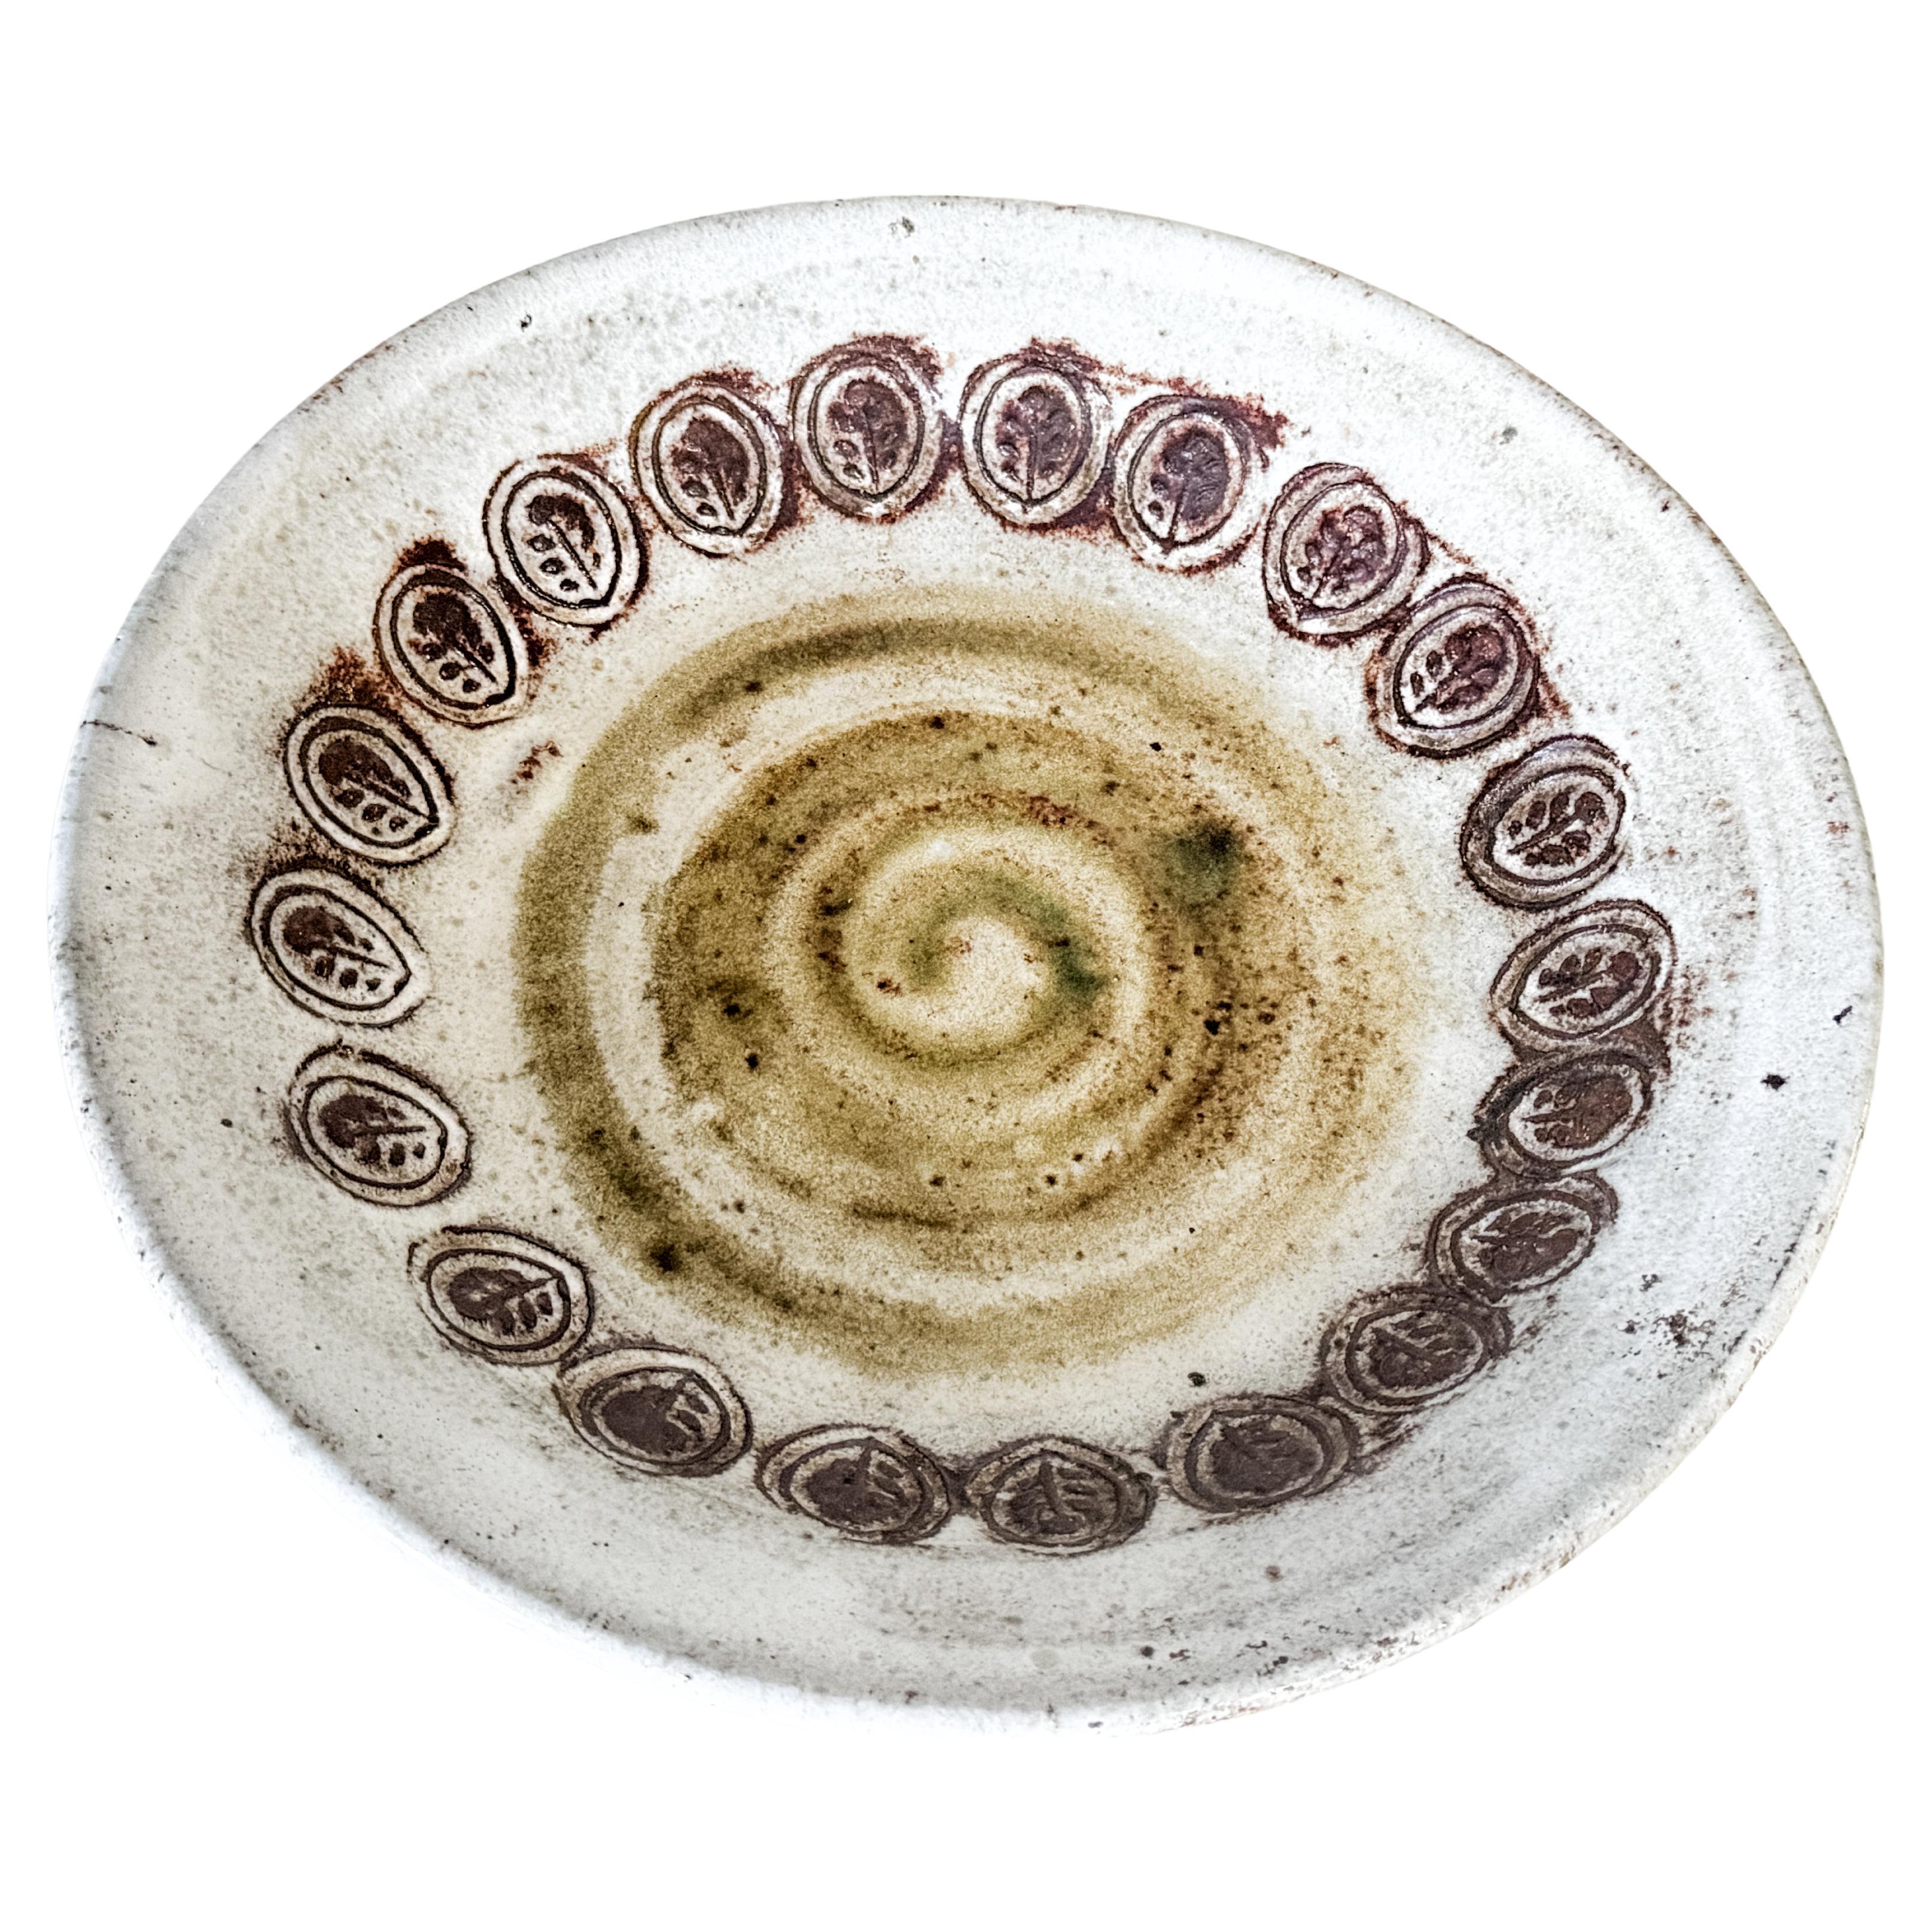 Mid-Century Modern Mid-Century French Decorative Ceramic Dish / Vide-Poche by Albert Thiry C. 1960s For Sale